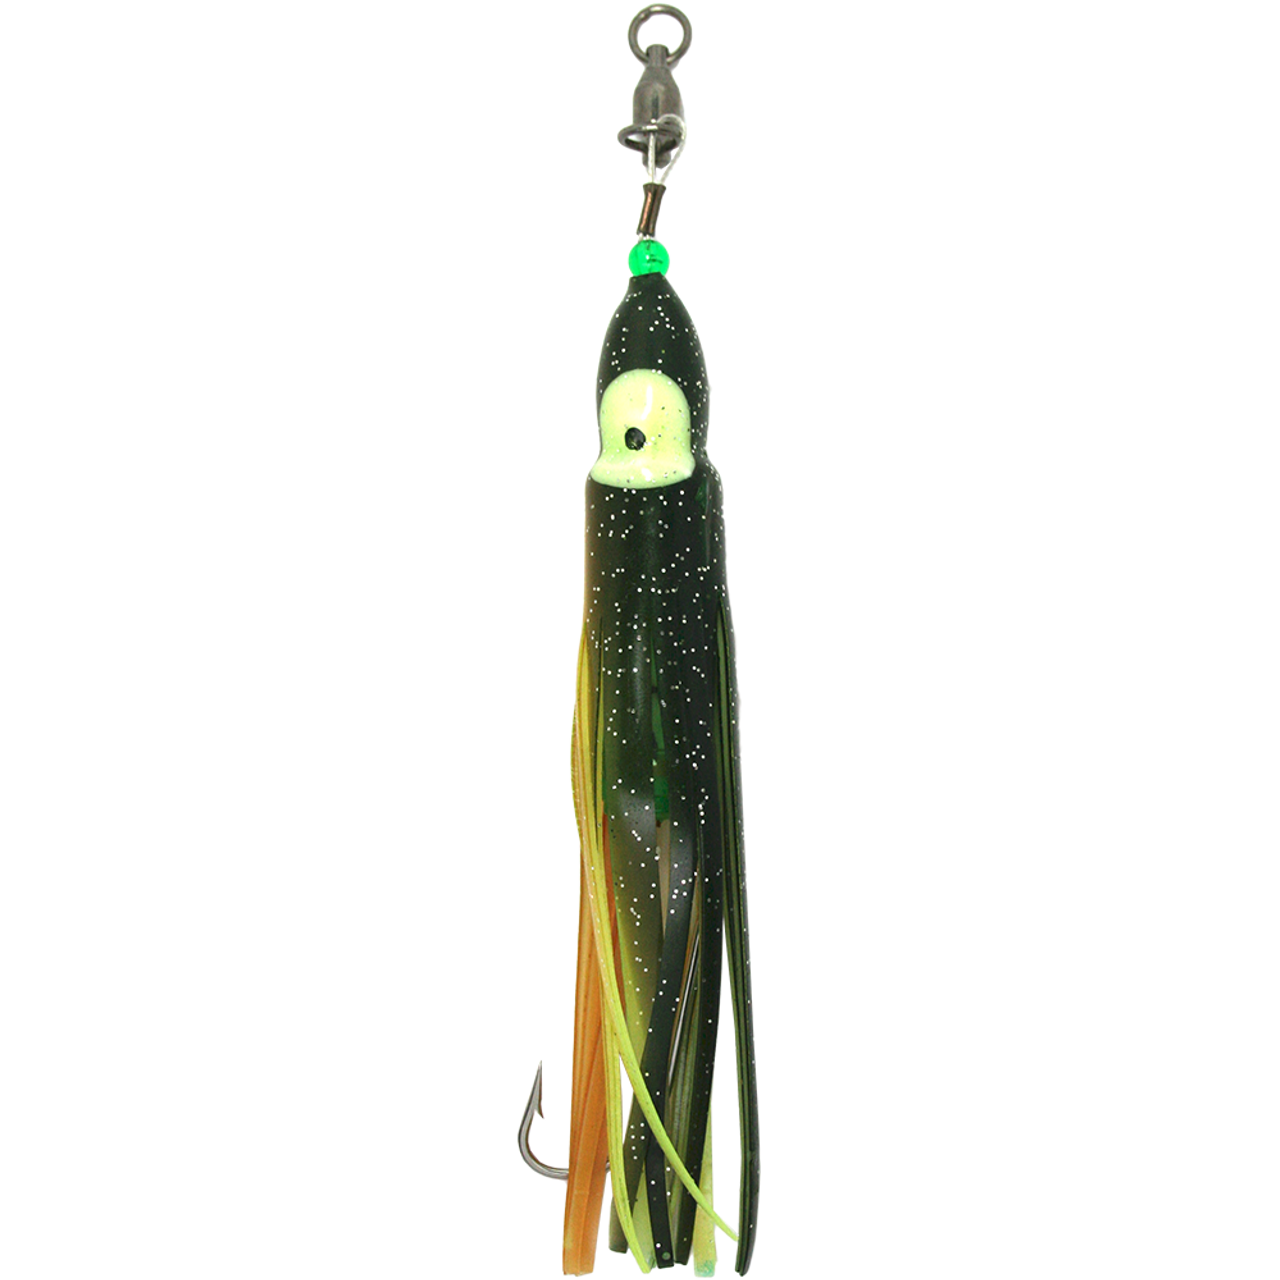 10 Pieces 4-3/4 Hoochie Squid Skirts Octopus Fishing Lures Black